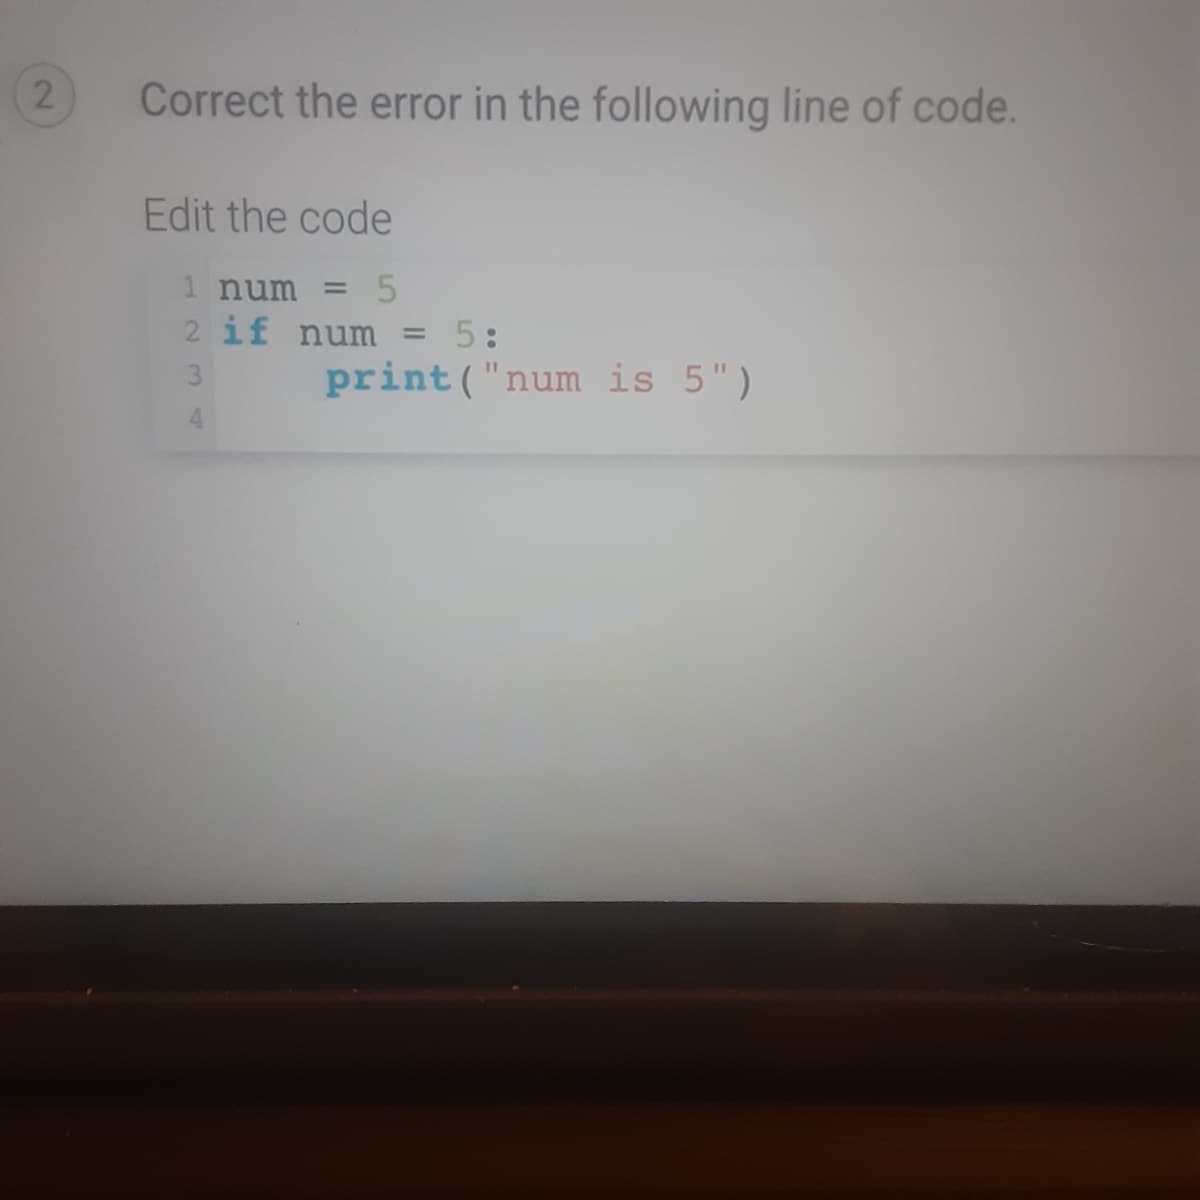 Correct the error in the following line of code.
Edit the code
1 num = 5
2 if num = 5:
3
print ("num is 5")
4.
2.
